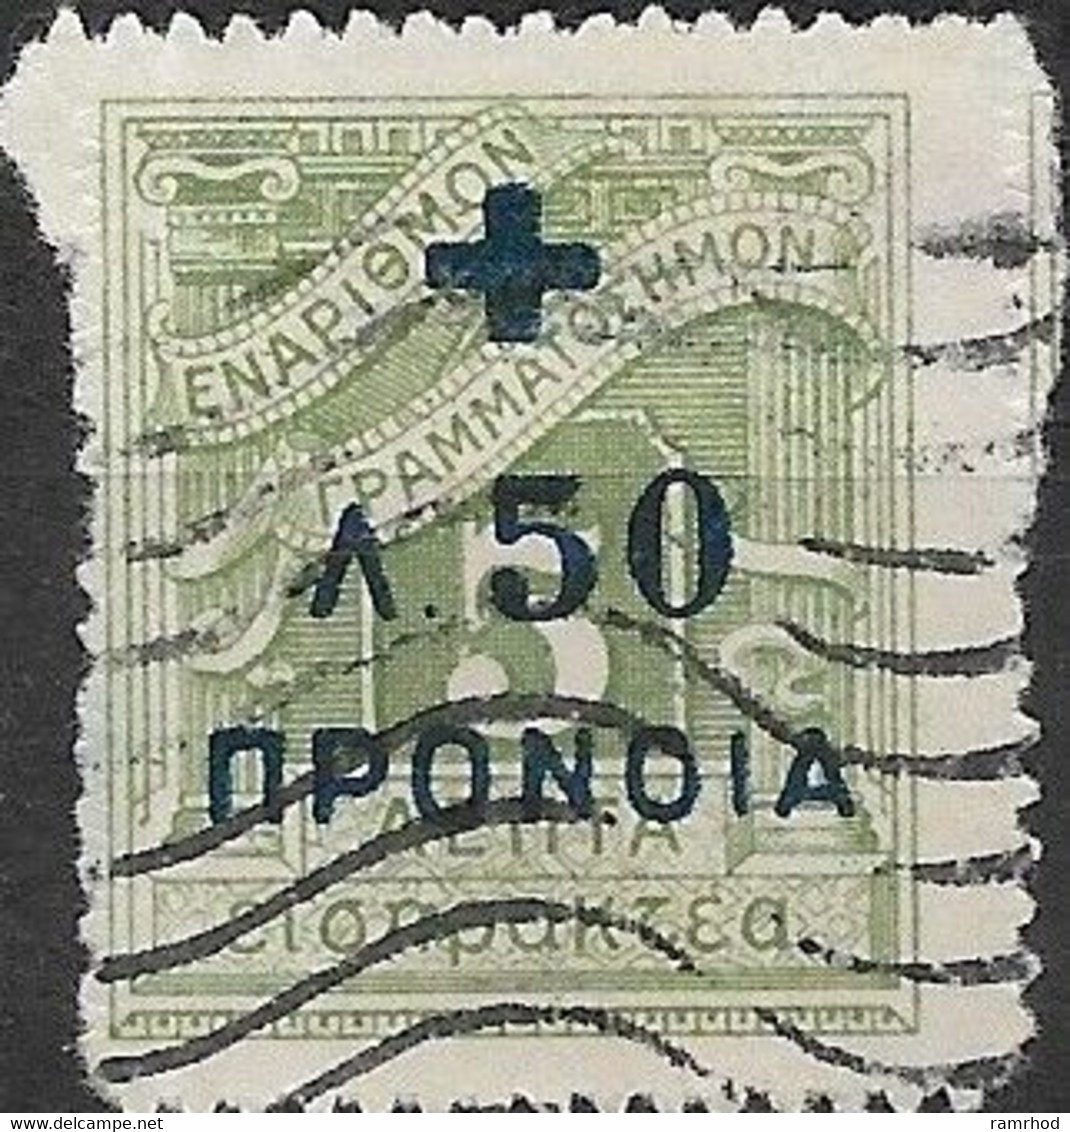 GREECE 1938 Charity Tax - Postage Due Surcharged - 50l. On 5l. - Green FU - Charity Issues